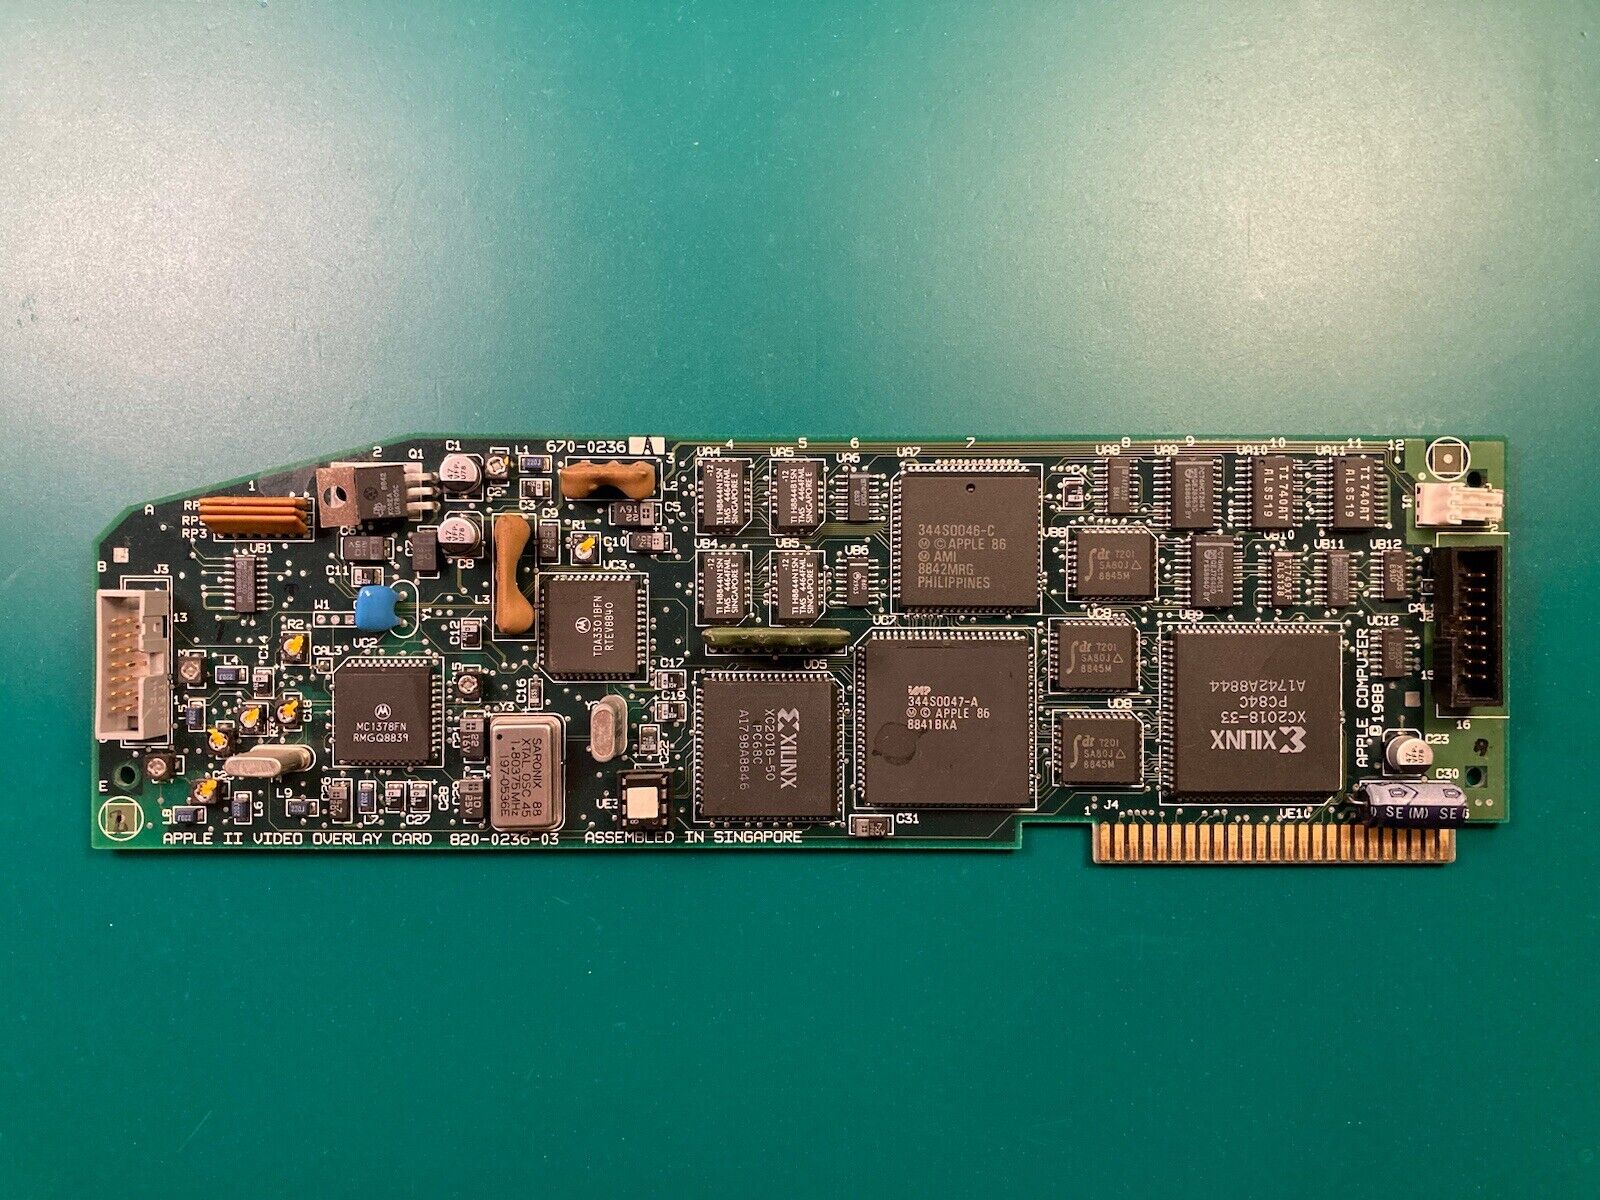 Apple II Video Overlay Card - for IIe and IIgs 820-0236-03 - Recapped, Tested